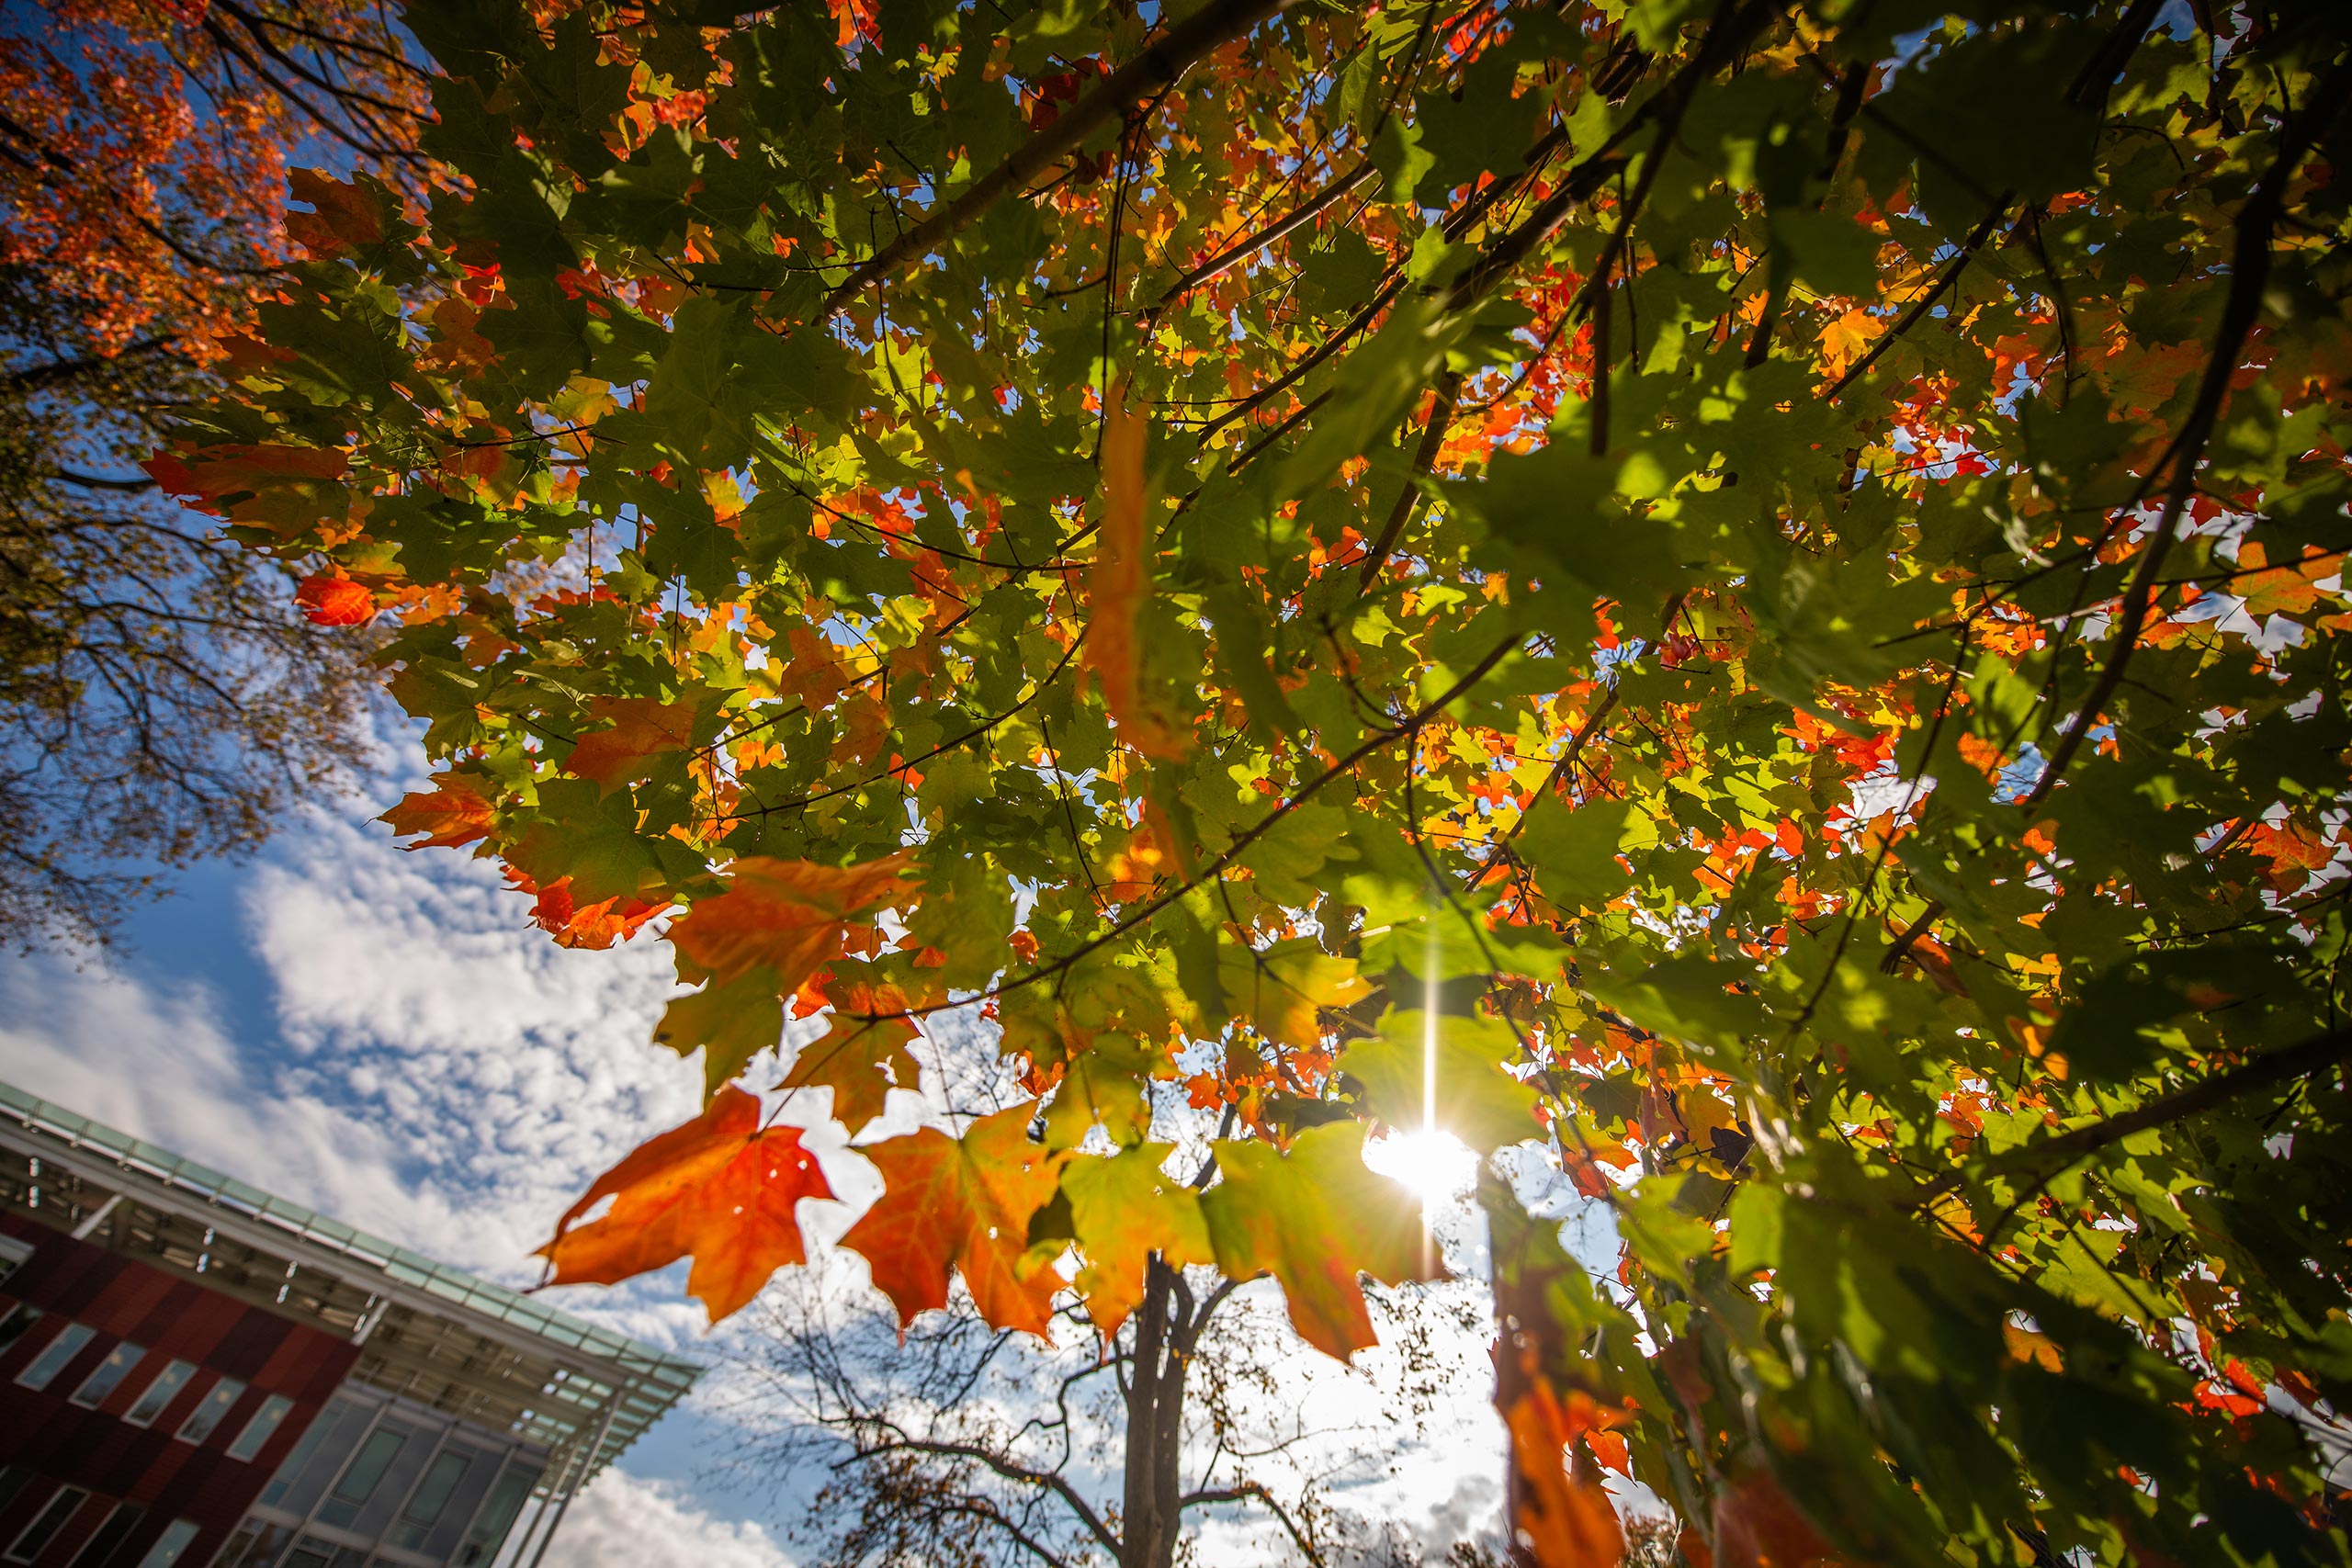 Fall foliage on the Clark University campus seen from the perspective of the ground with sunlight illuminating the trees